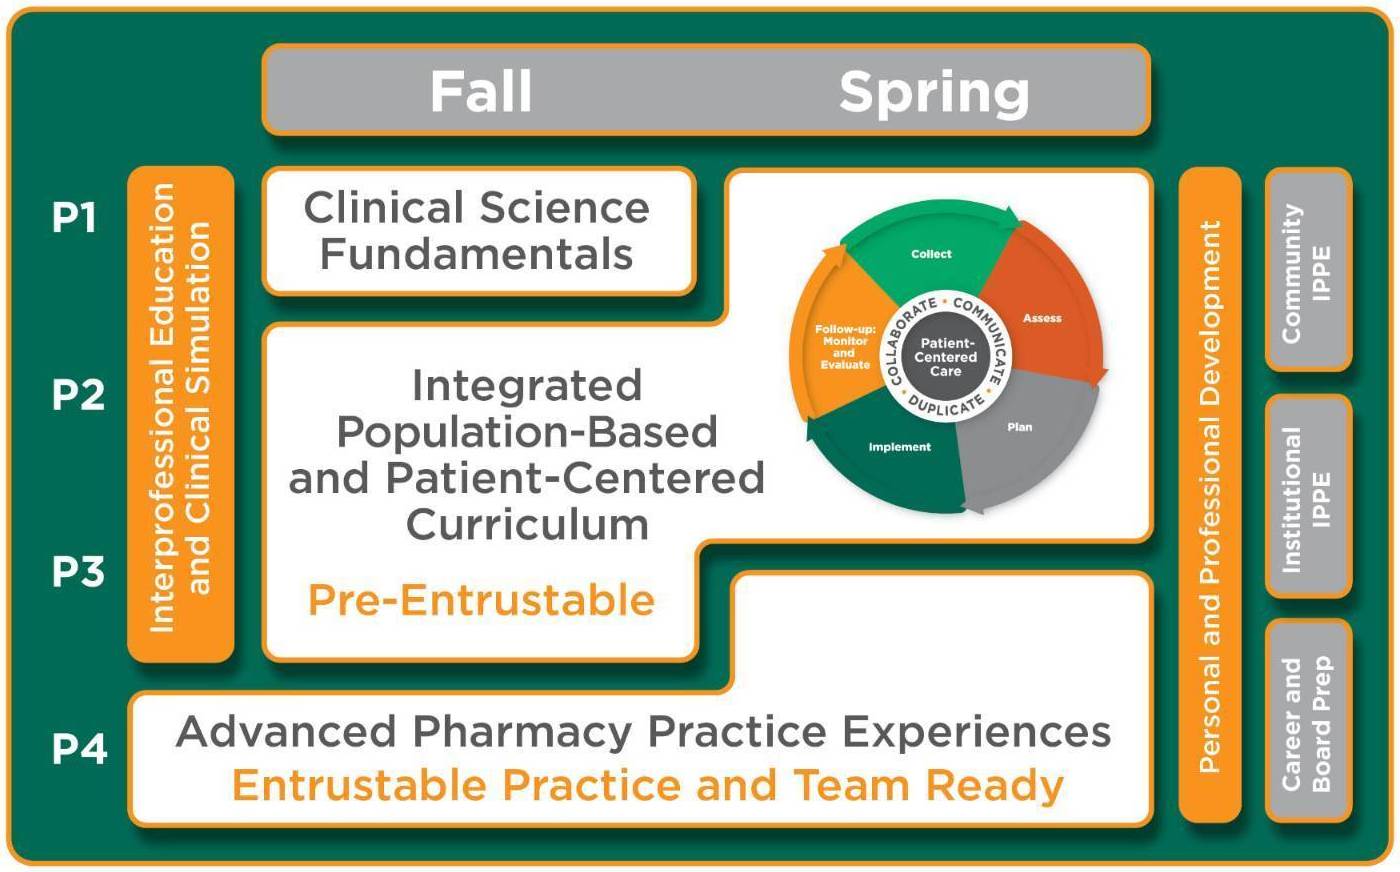 4UT infographic. Clinical Sciences Fundamentals - Fall of P1 year. Integrated population-based and patient-workflow fundamentas - Spring P2-Spring P3. APPE - Fall P3-Spring P4